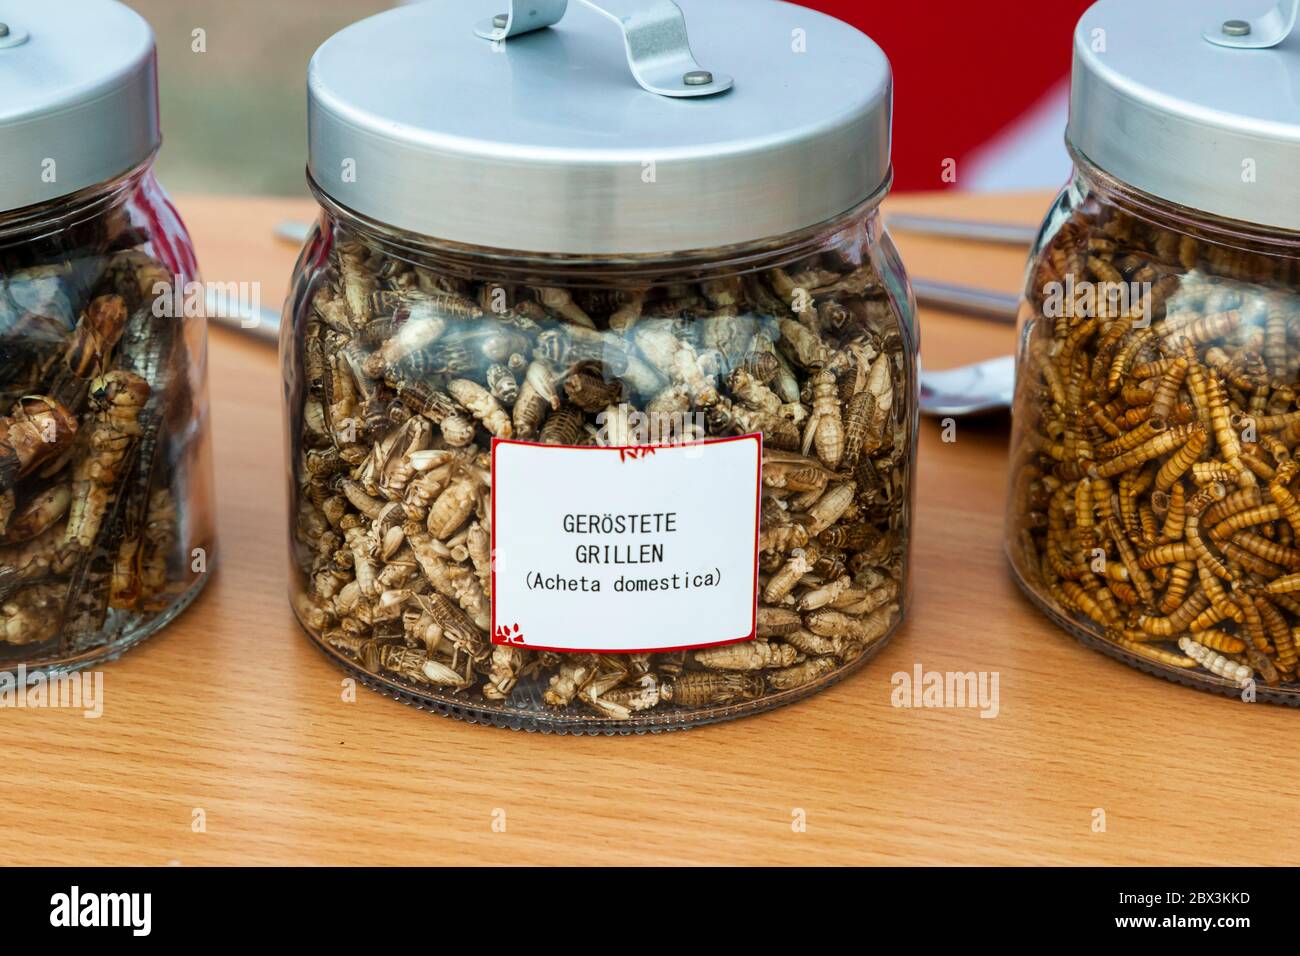 Roasted crickets (Acheta domestica) in a jar. Delicatessen made of Insects in Cologne, Germany Stock Photo